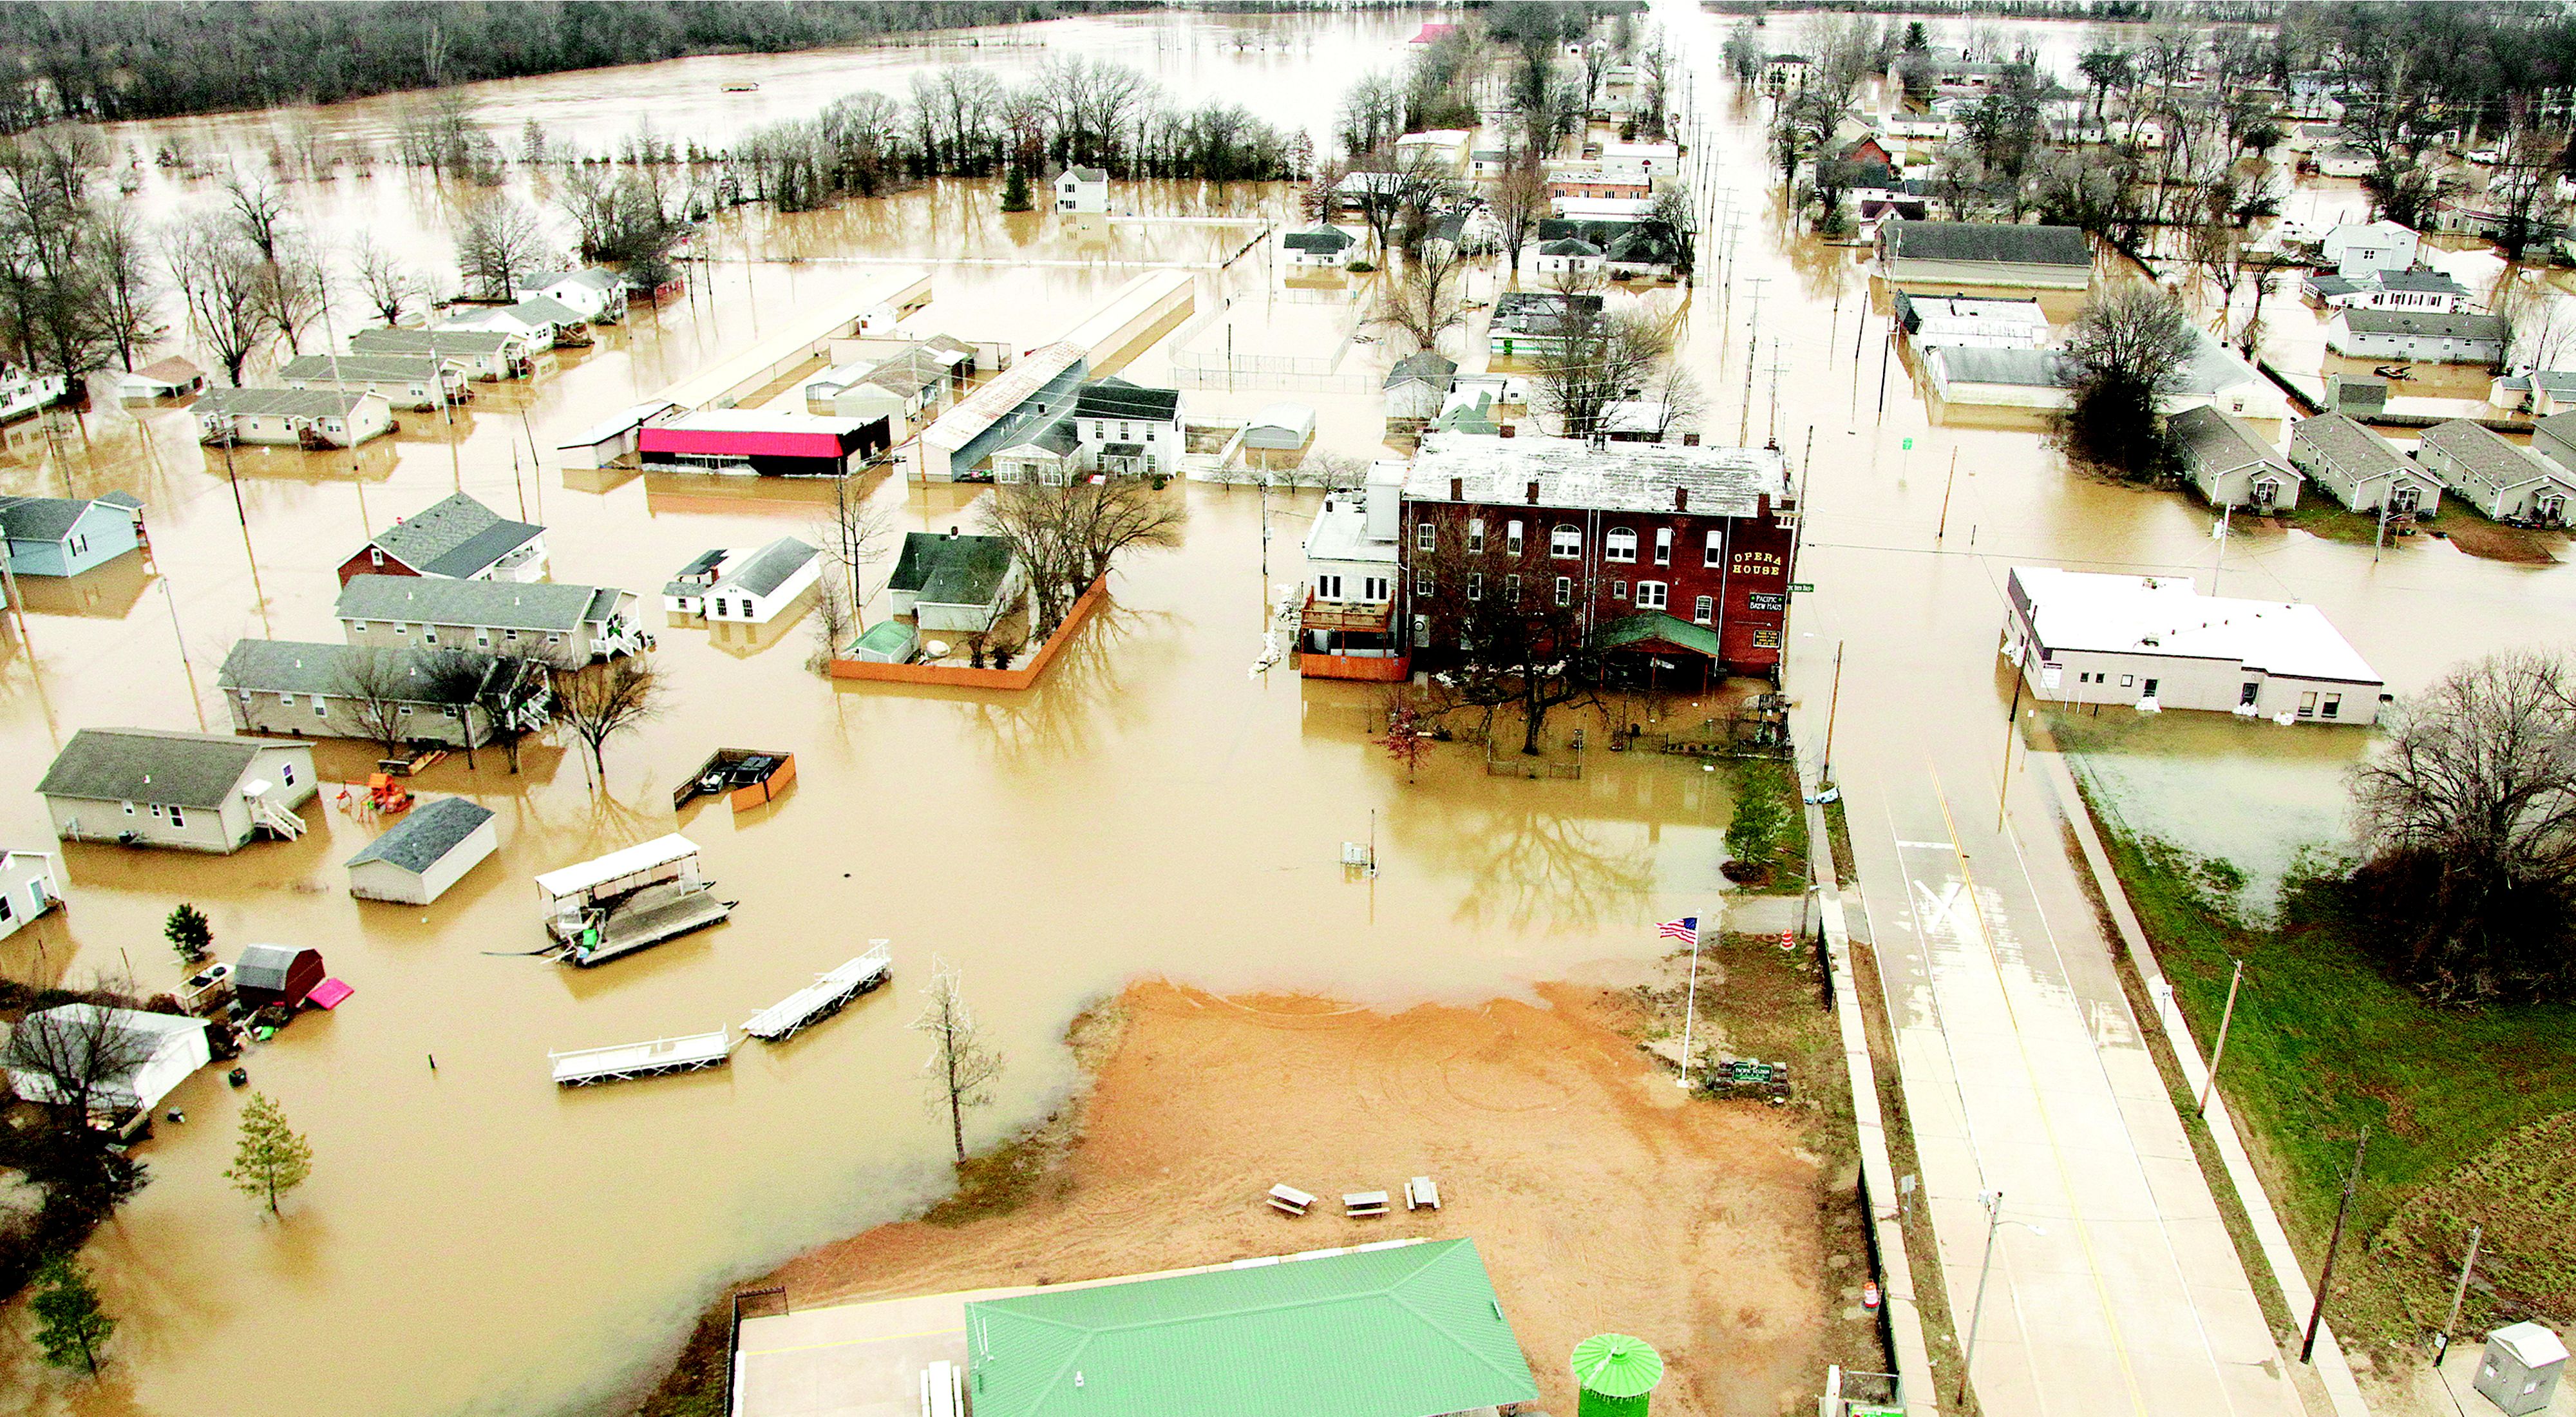 Aerial view of urban flooding along the Meramec River in Missouri in 2019.